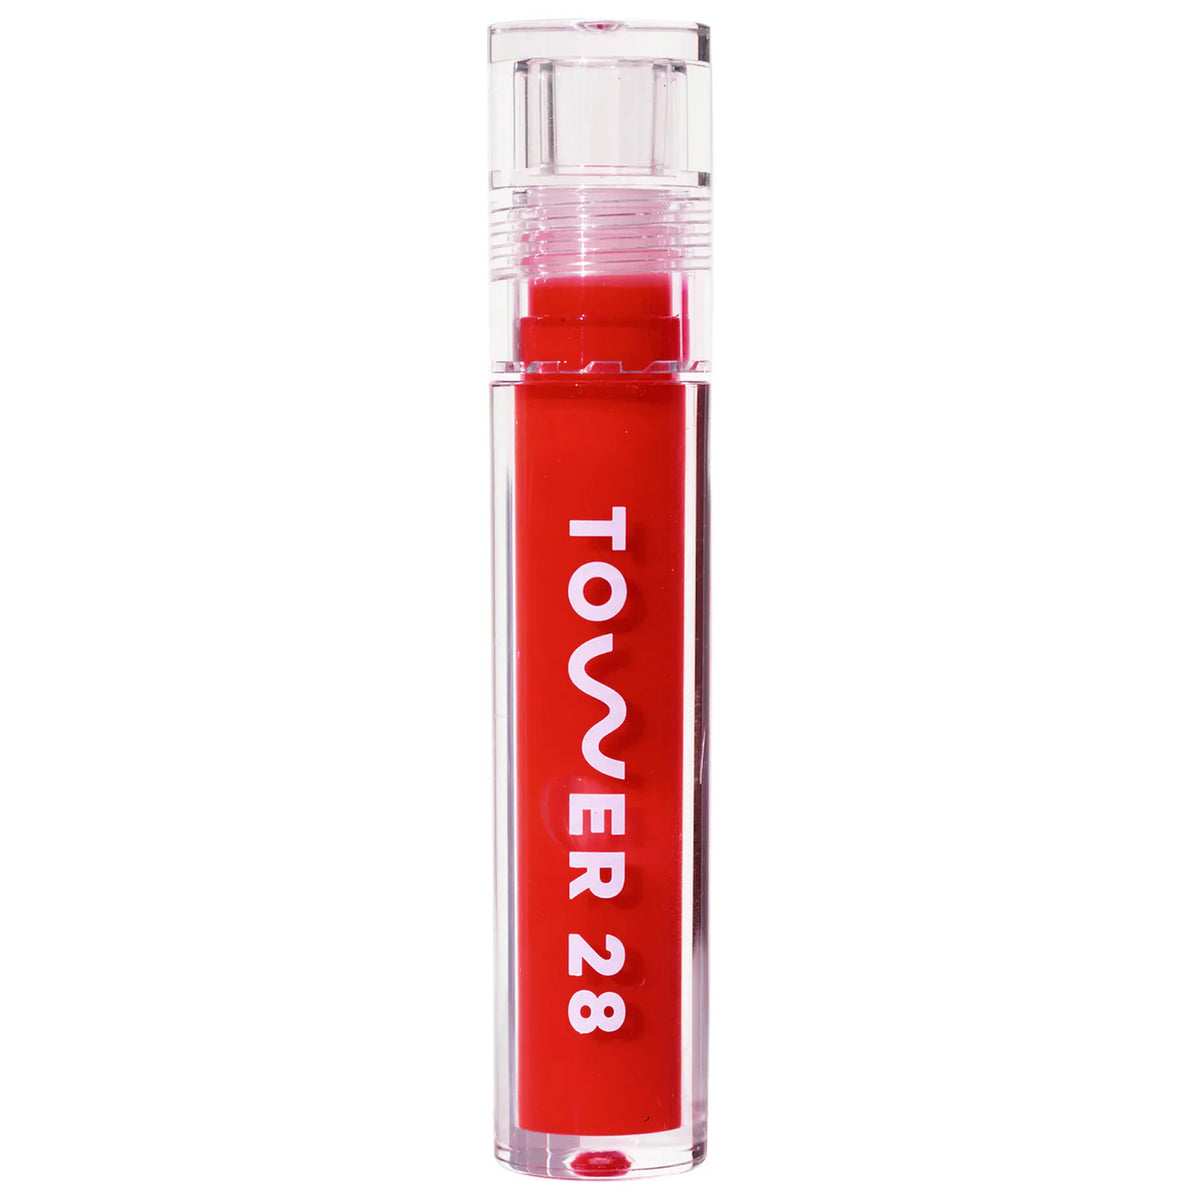 Tower 28 Beauty ShineOn Lip Jelly Non-Sticky Gloss Lipgloss Volare Makeup Spicy - sheer(ish) red  